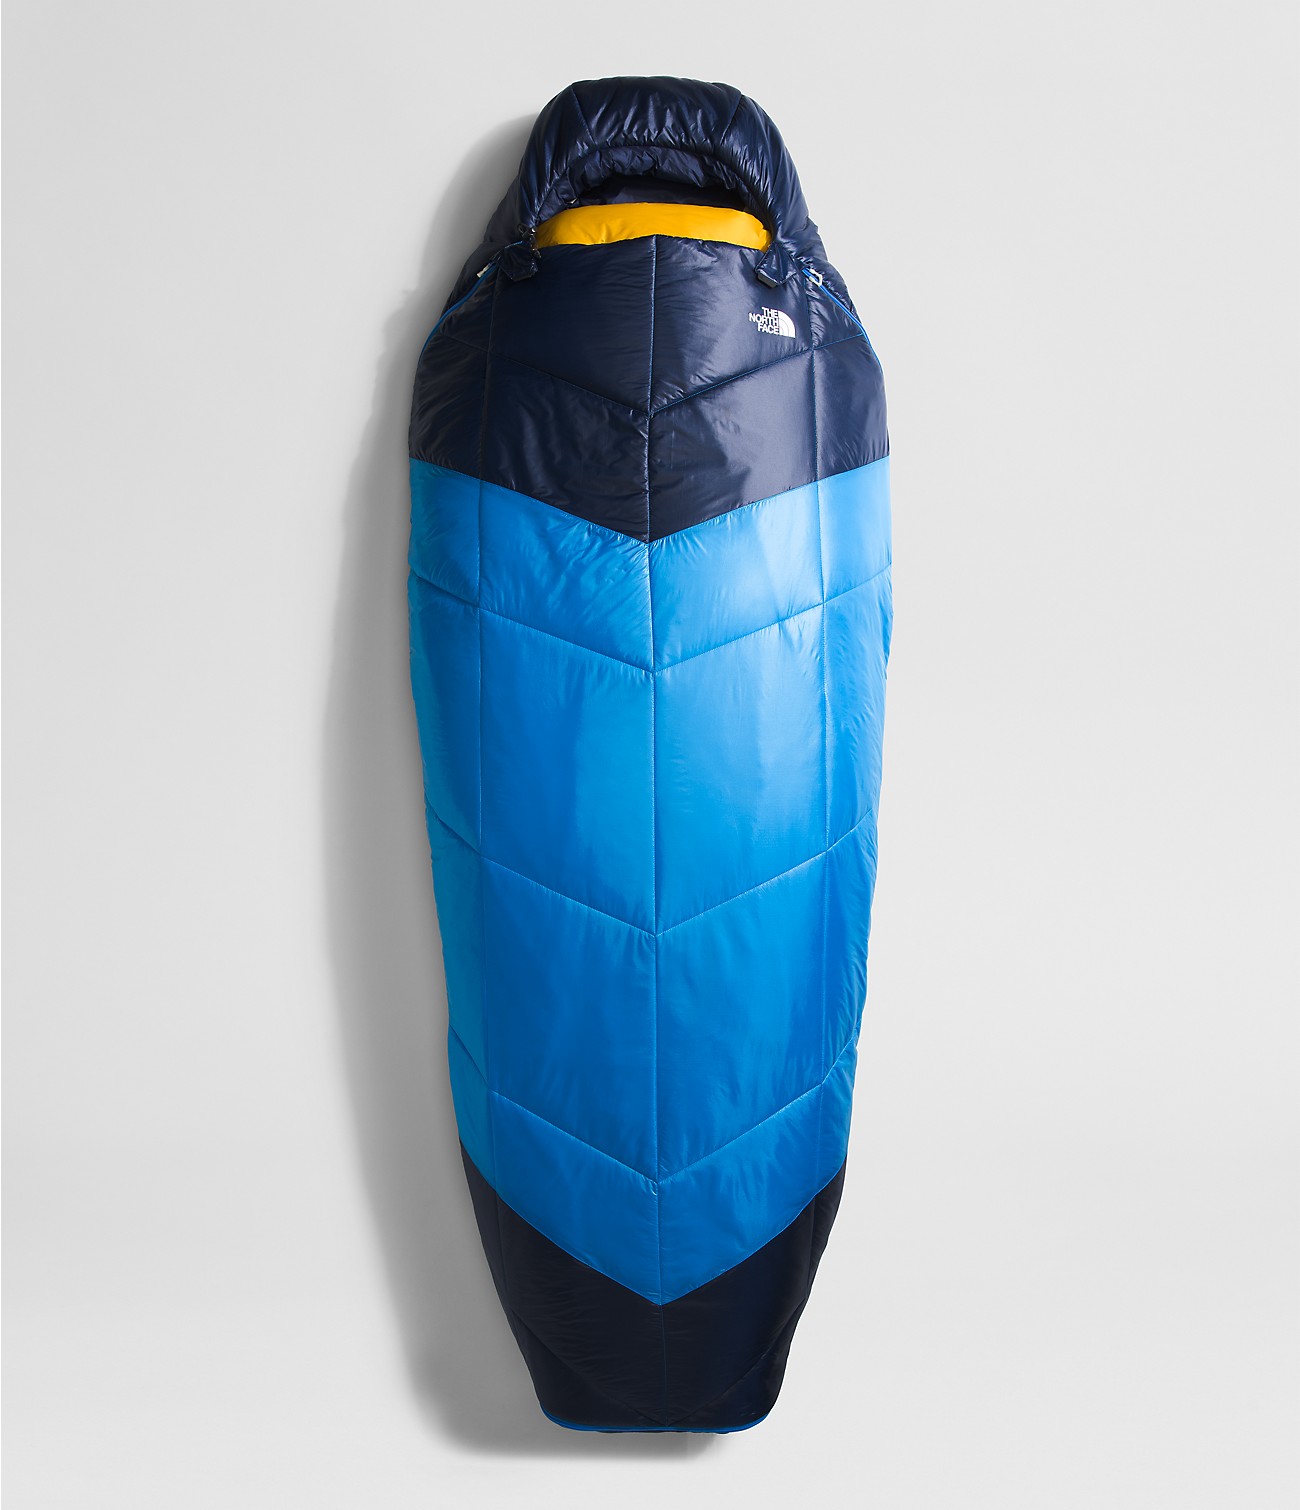 Unlock Wilderness' choice in the Rei Vs North Face comparison, the One Bag Sleeping Bag by The North Face